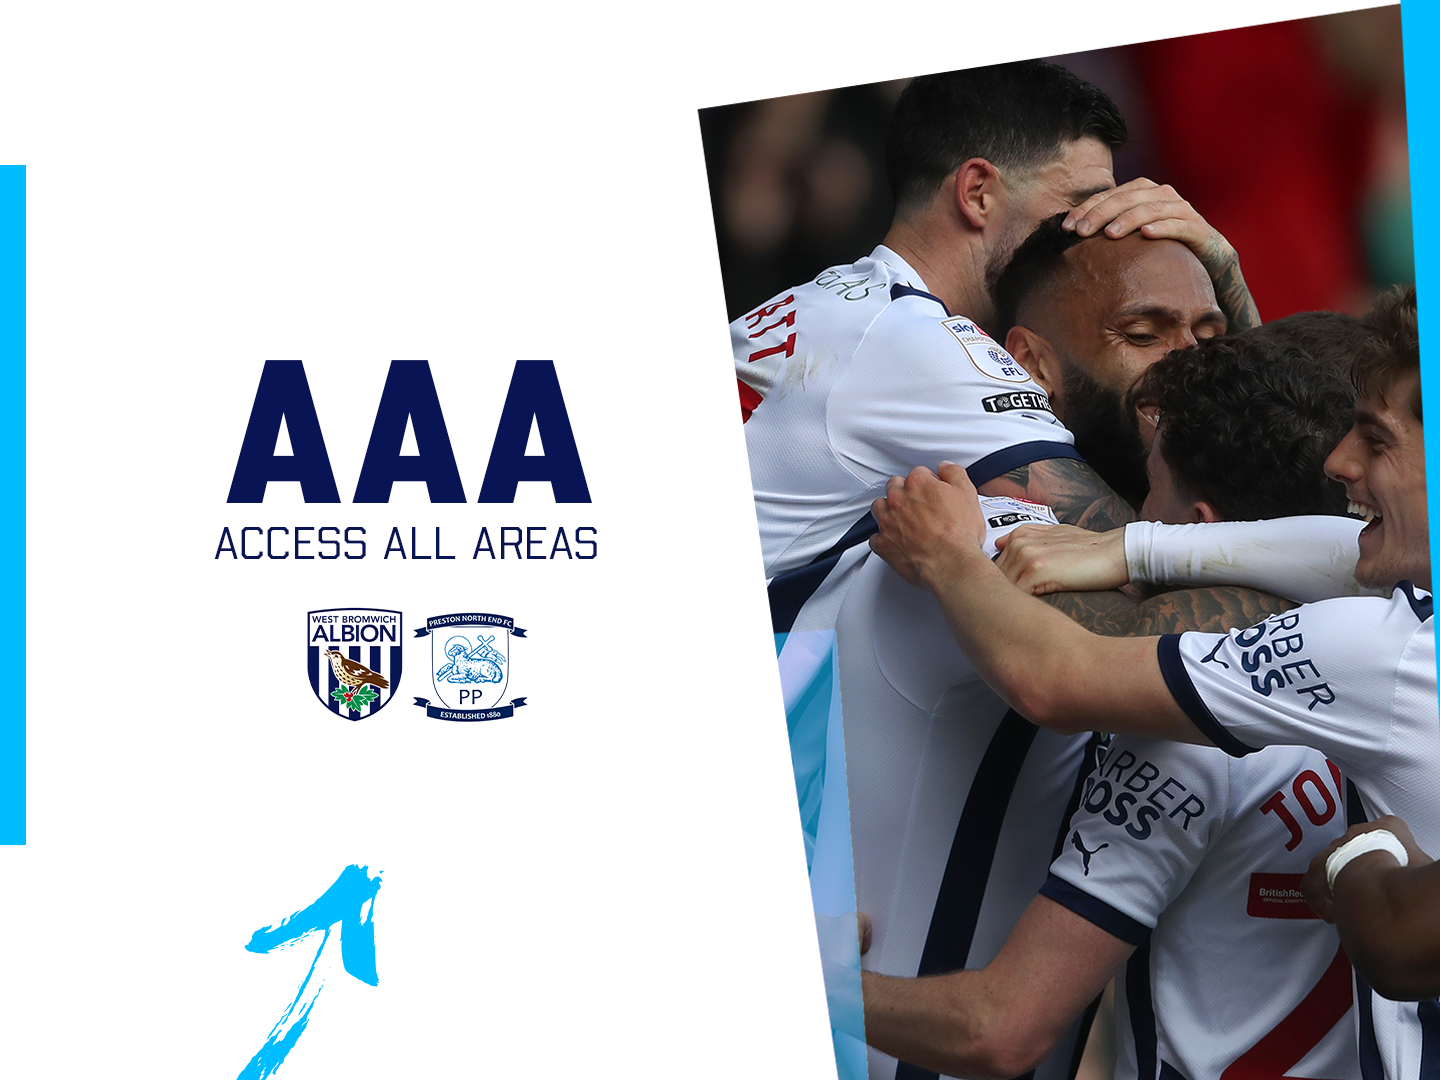 A AAA Matchday graphic, showing the club crests of Albion and Preston, with a photo of Kyle Bartley celebrating